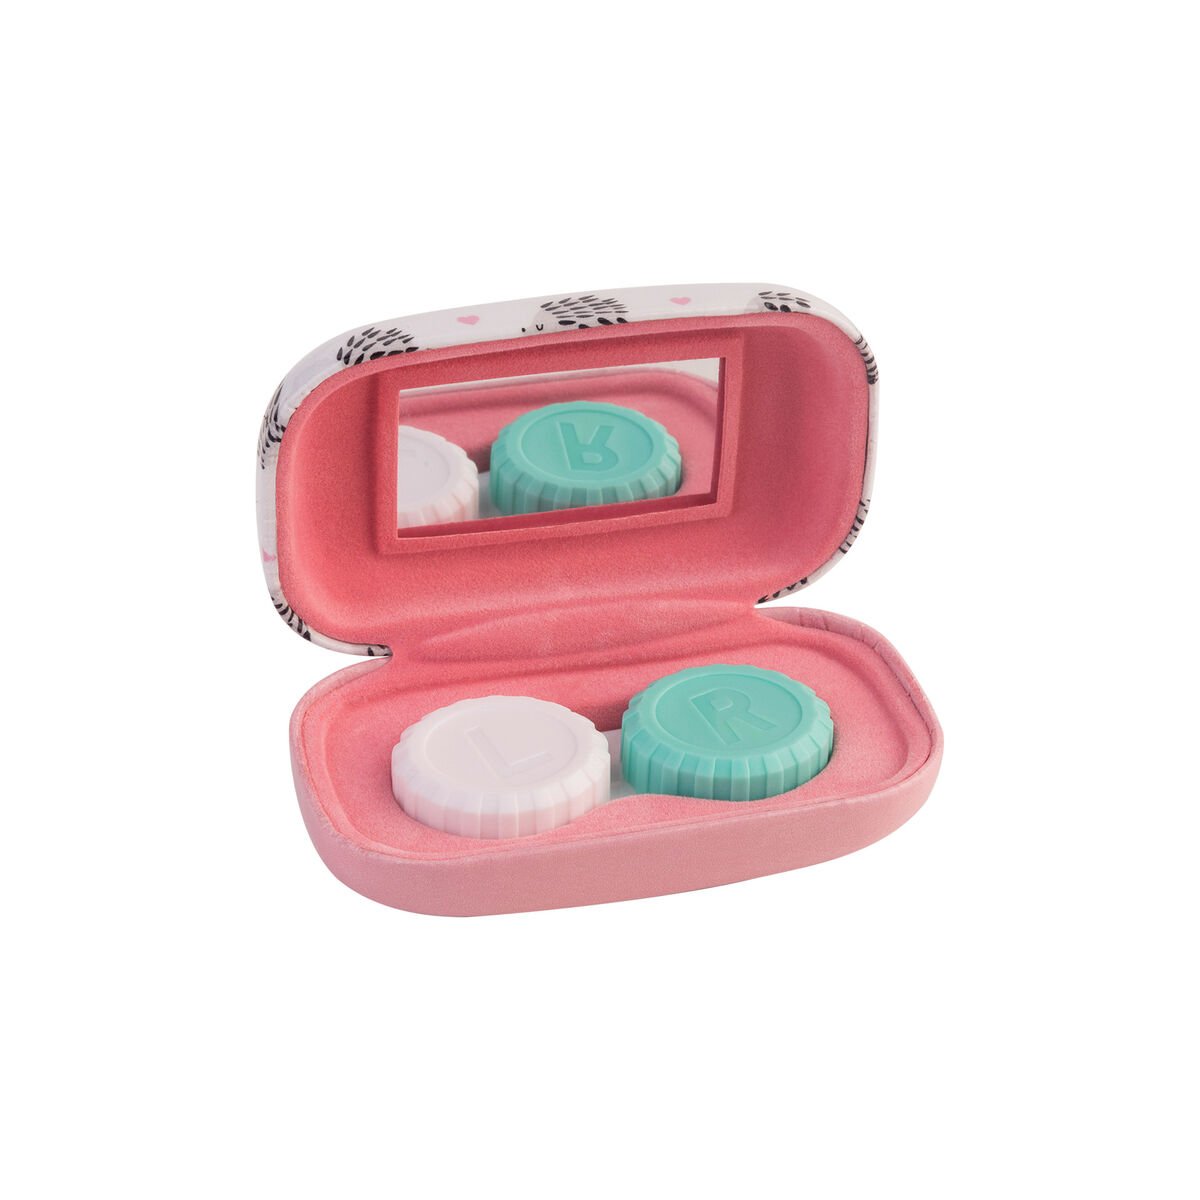 Contact Lens Case With Mirrors, , zoo